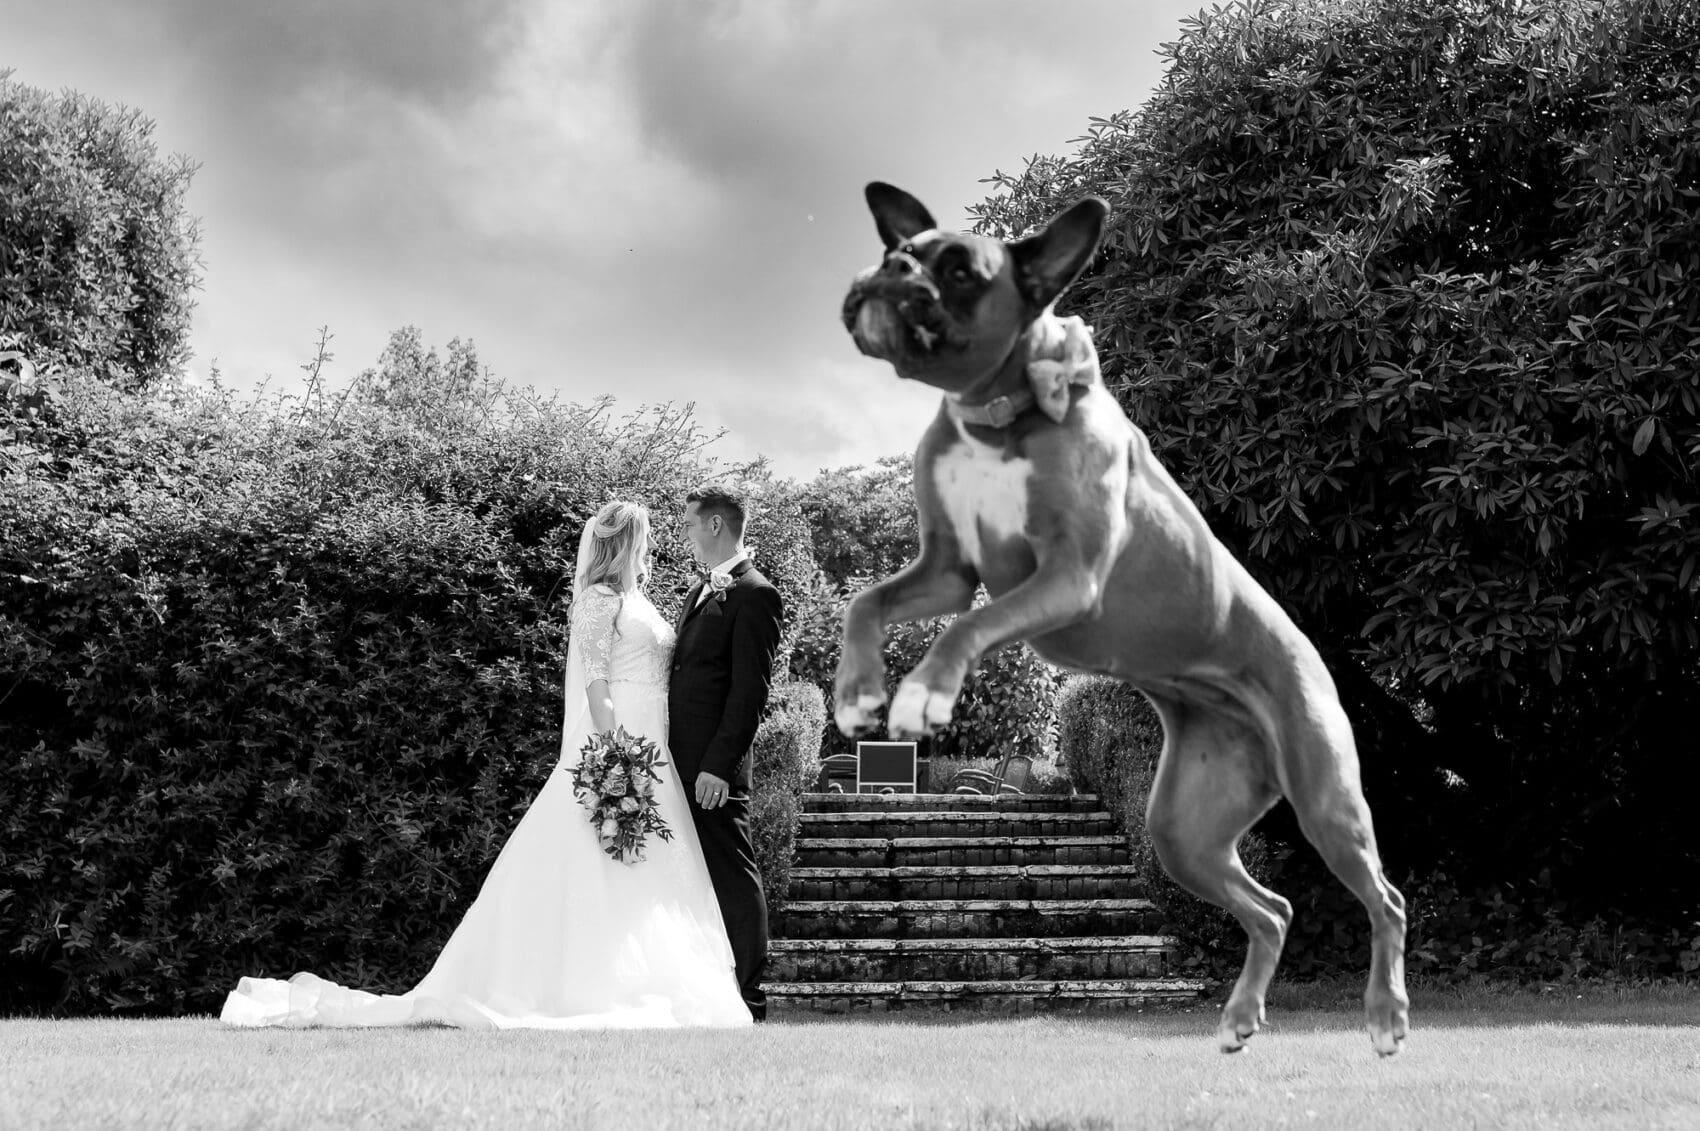 Boxer dog jumps in front of the bride and groom as they pose